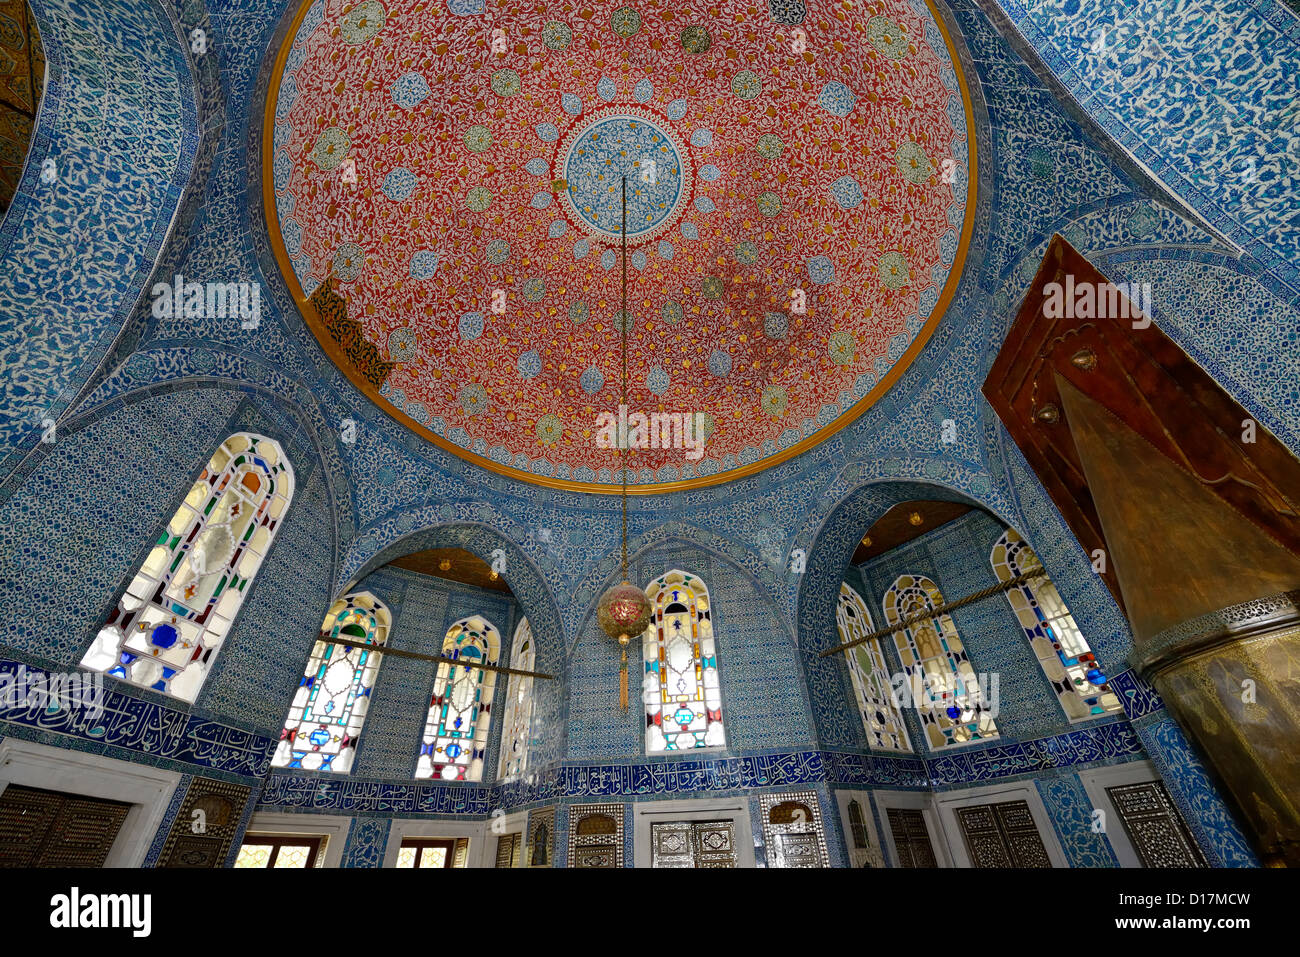 Ornate domed ceiling of the Baghdad Kiosk at Topkapi Palace Istanbul Turkey Stock Photo